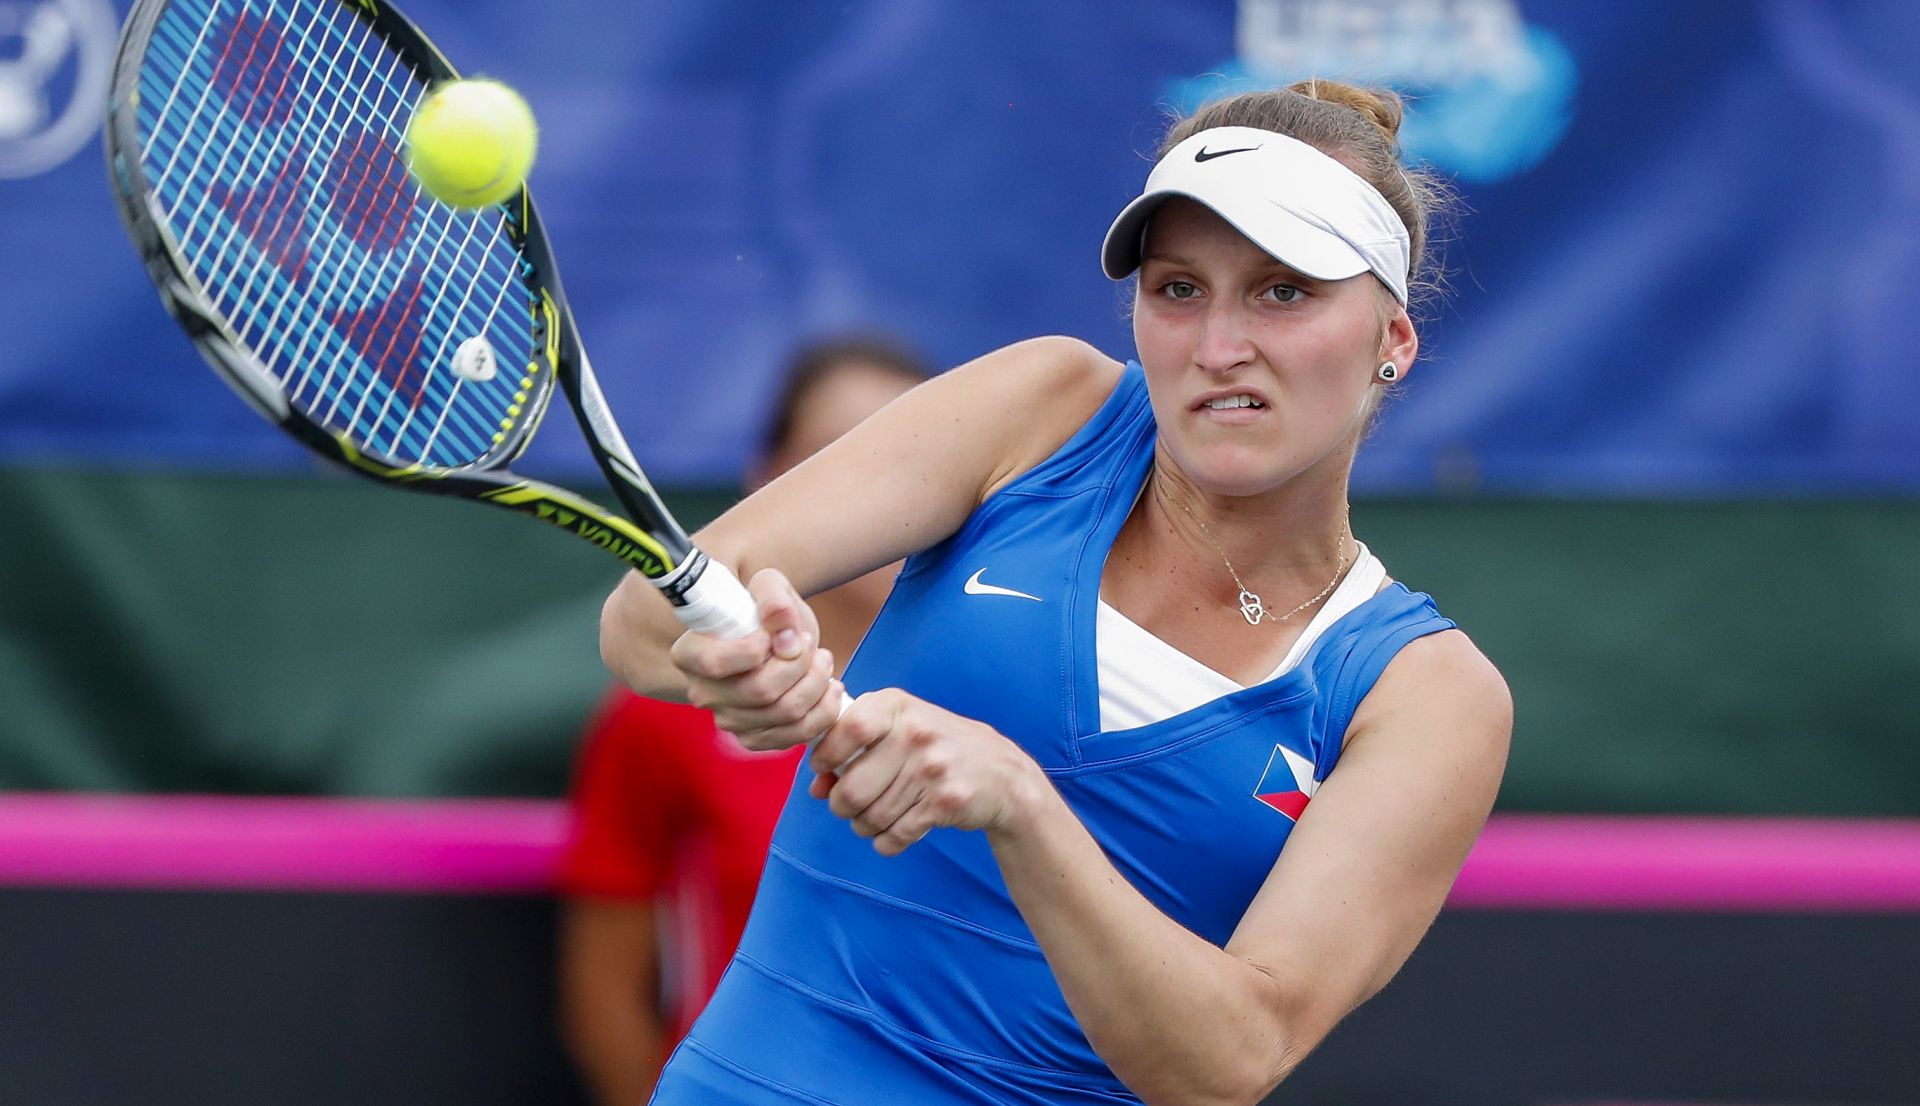 epa05921866 Marketa Vondrousova of the Czech Republic in action against CoCo Vandeweghe of the US during a Fed Cup World Group Semifinal women's tennis match between the United States and the Czech Republic at the Saddlebrook Resort in Wesley Chapel, Florida, USA, 22 April 2017.  EPA/ERIK S. LESSER